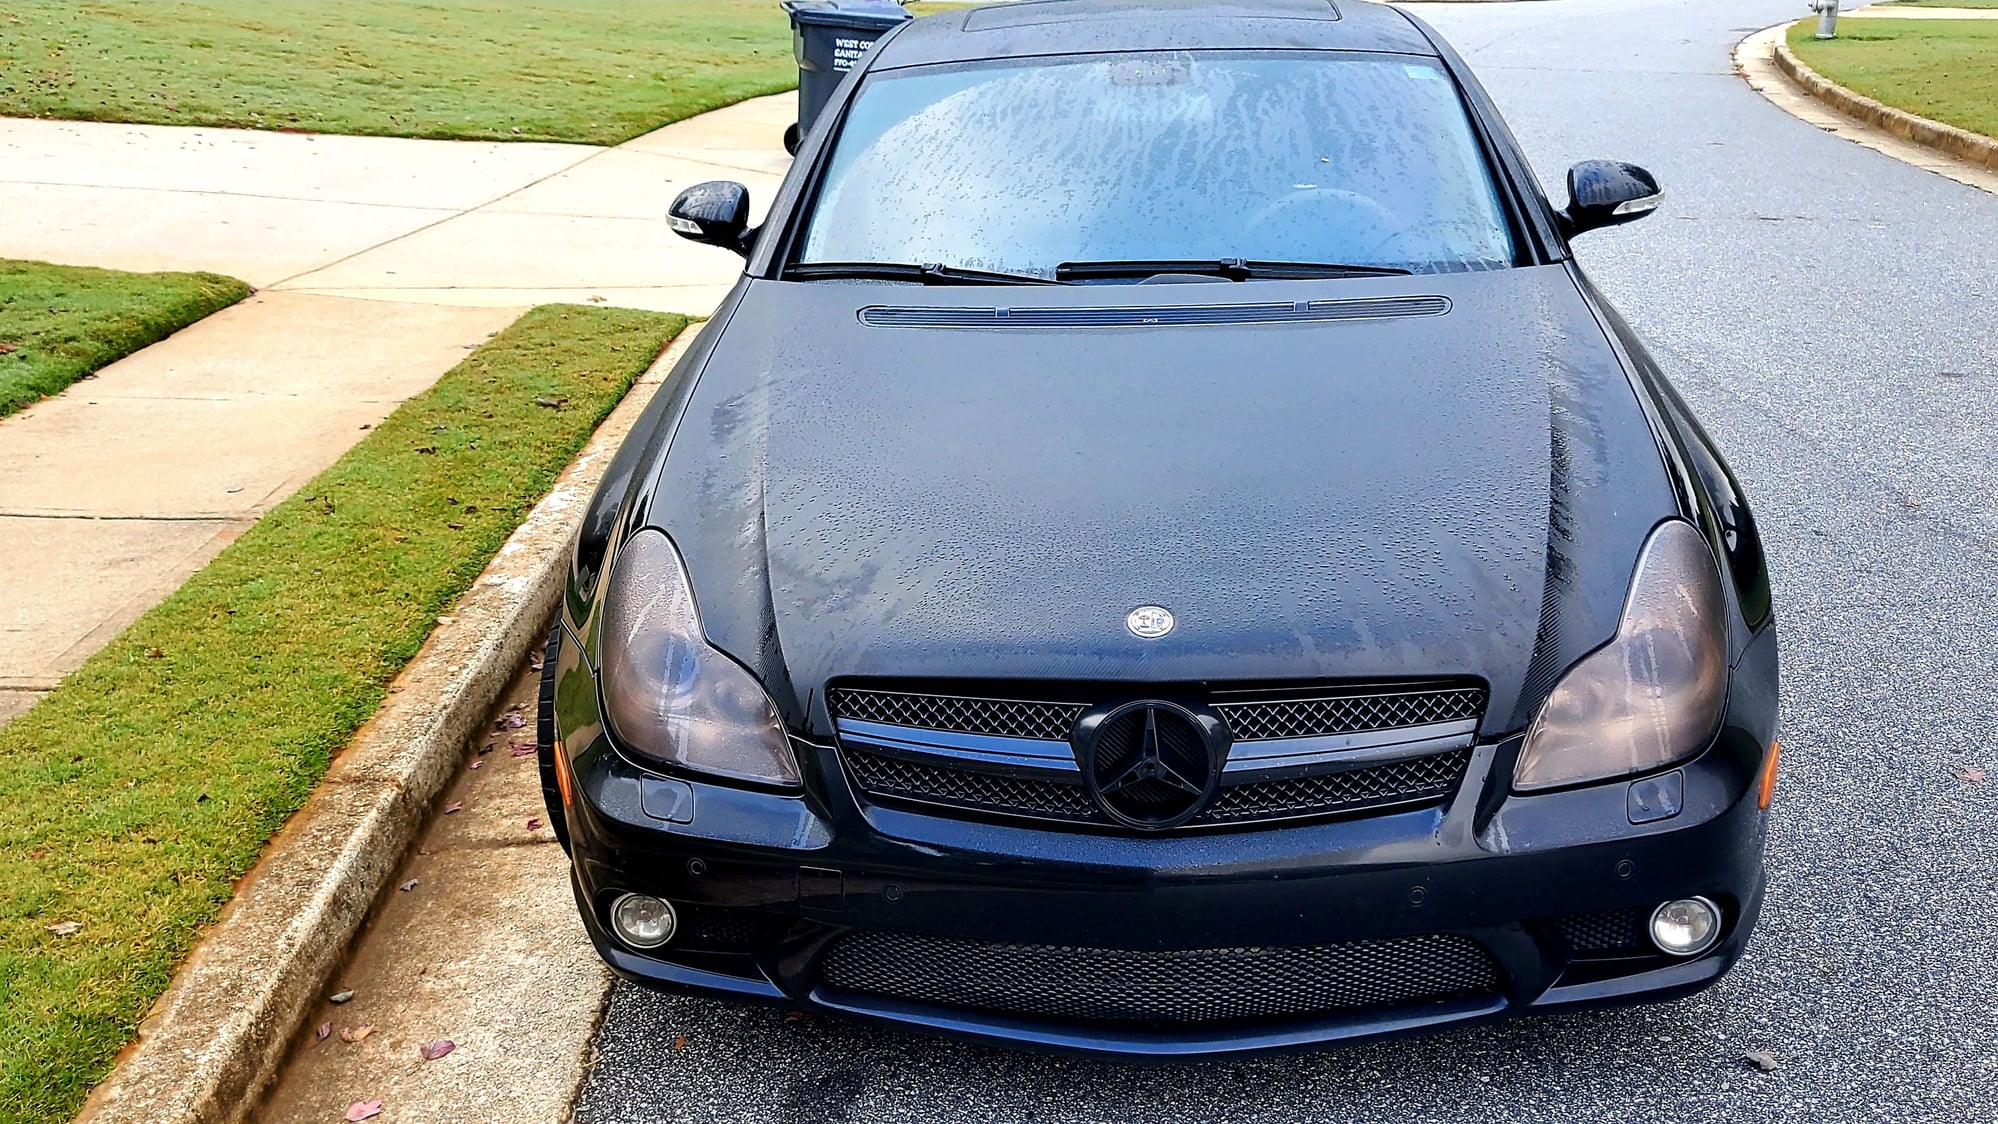 2006 Mercedes-Benz CLS55 AMG - Weistec CLS55 AMG-Clean and tastefully modified - Used - VIN WDDDJ76X56A070050 - 118,500 Miles - 8 cyl - 4WD - Automatic - Sedan - Marietta, GA 30064, United States